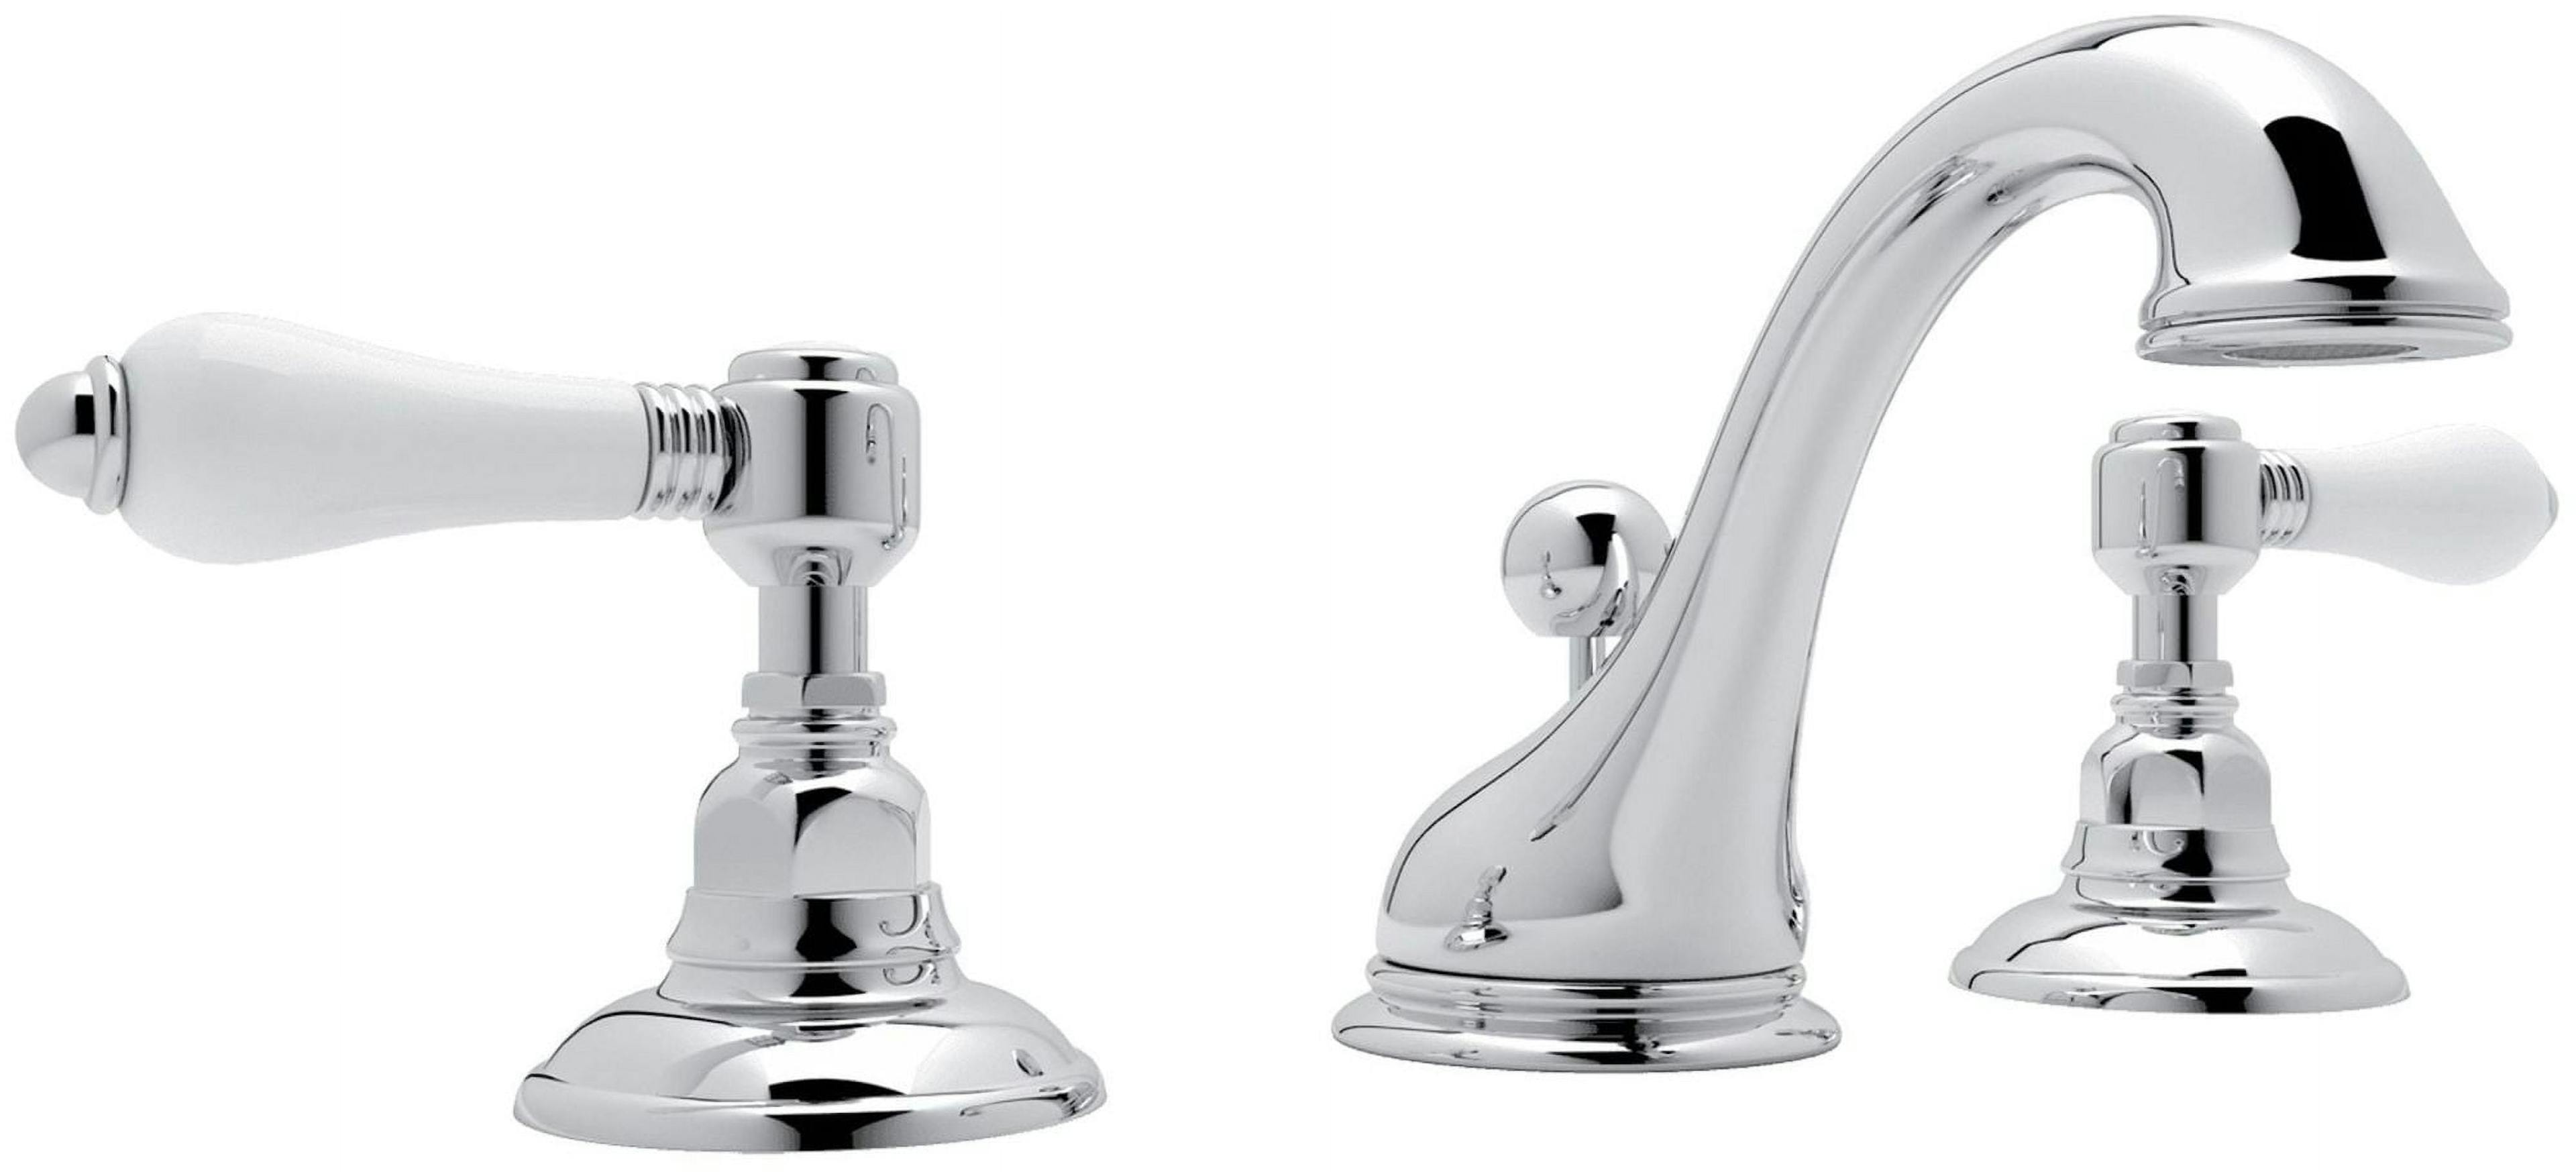 Elegant Viaggio Polished Chrome Widespread Bathroom Faucet with Porcelain Levers